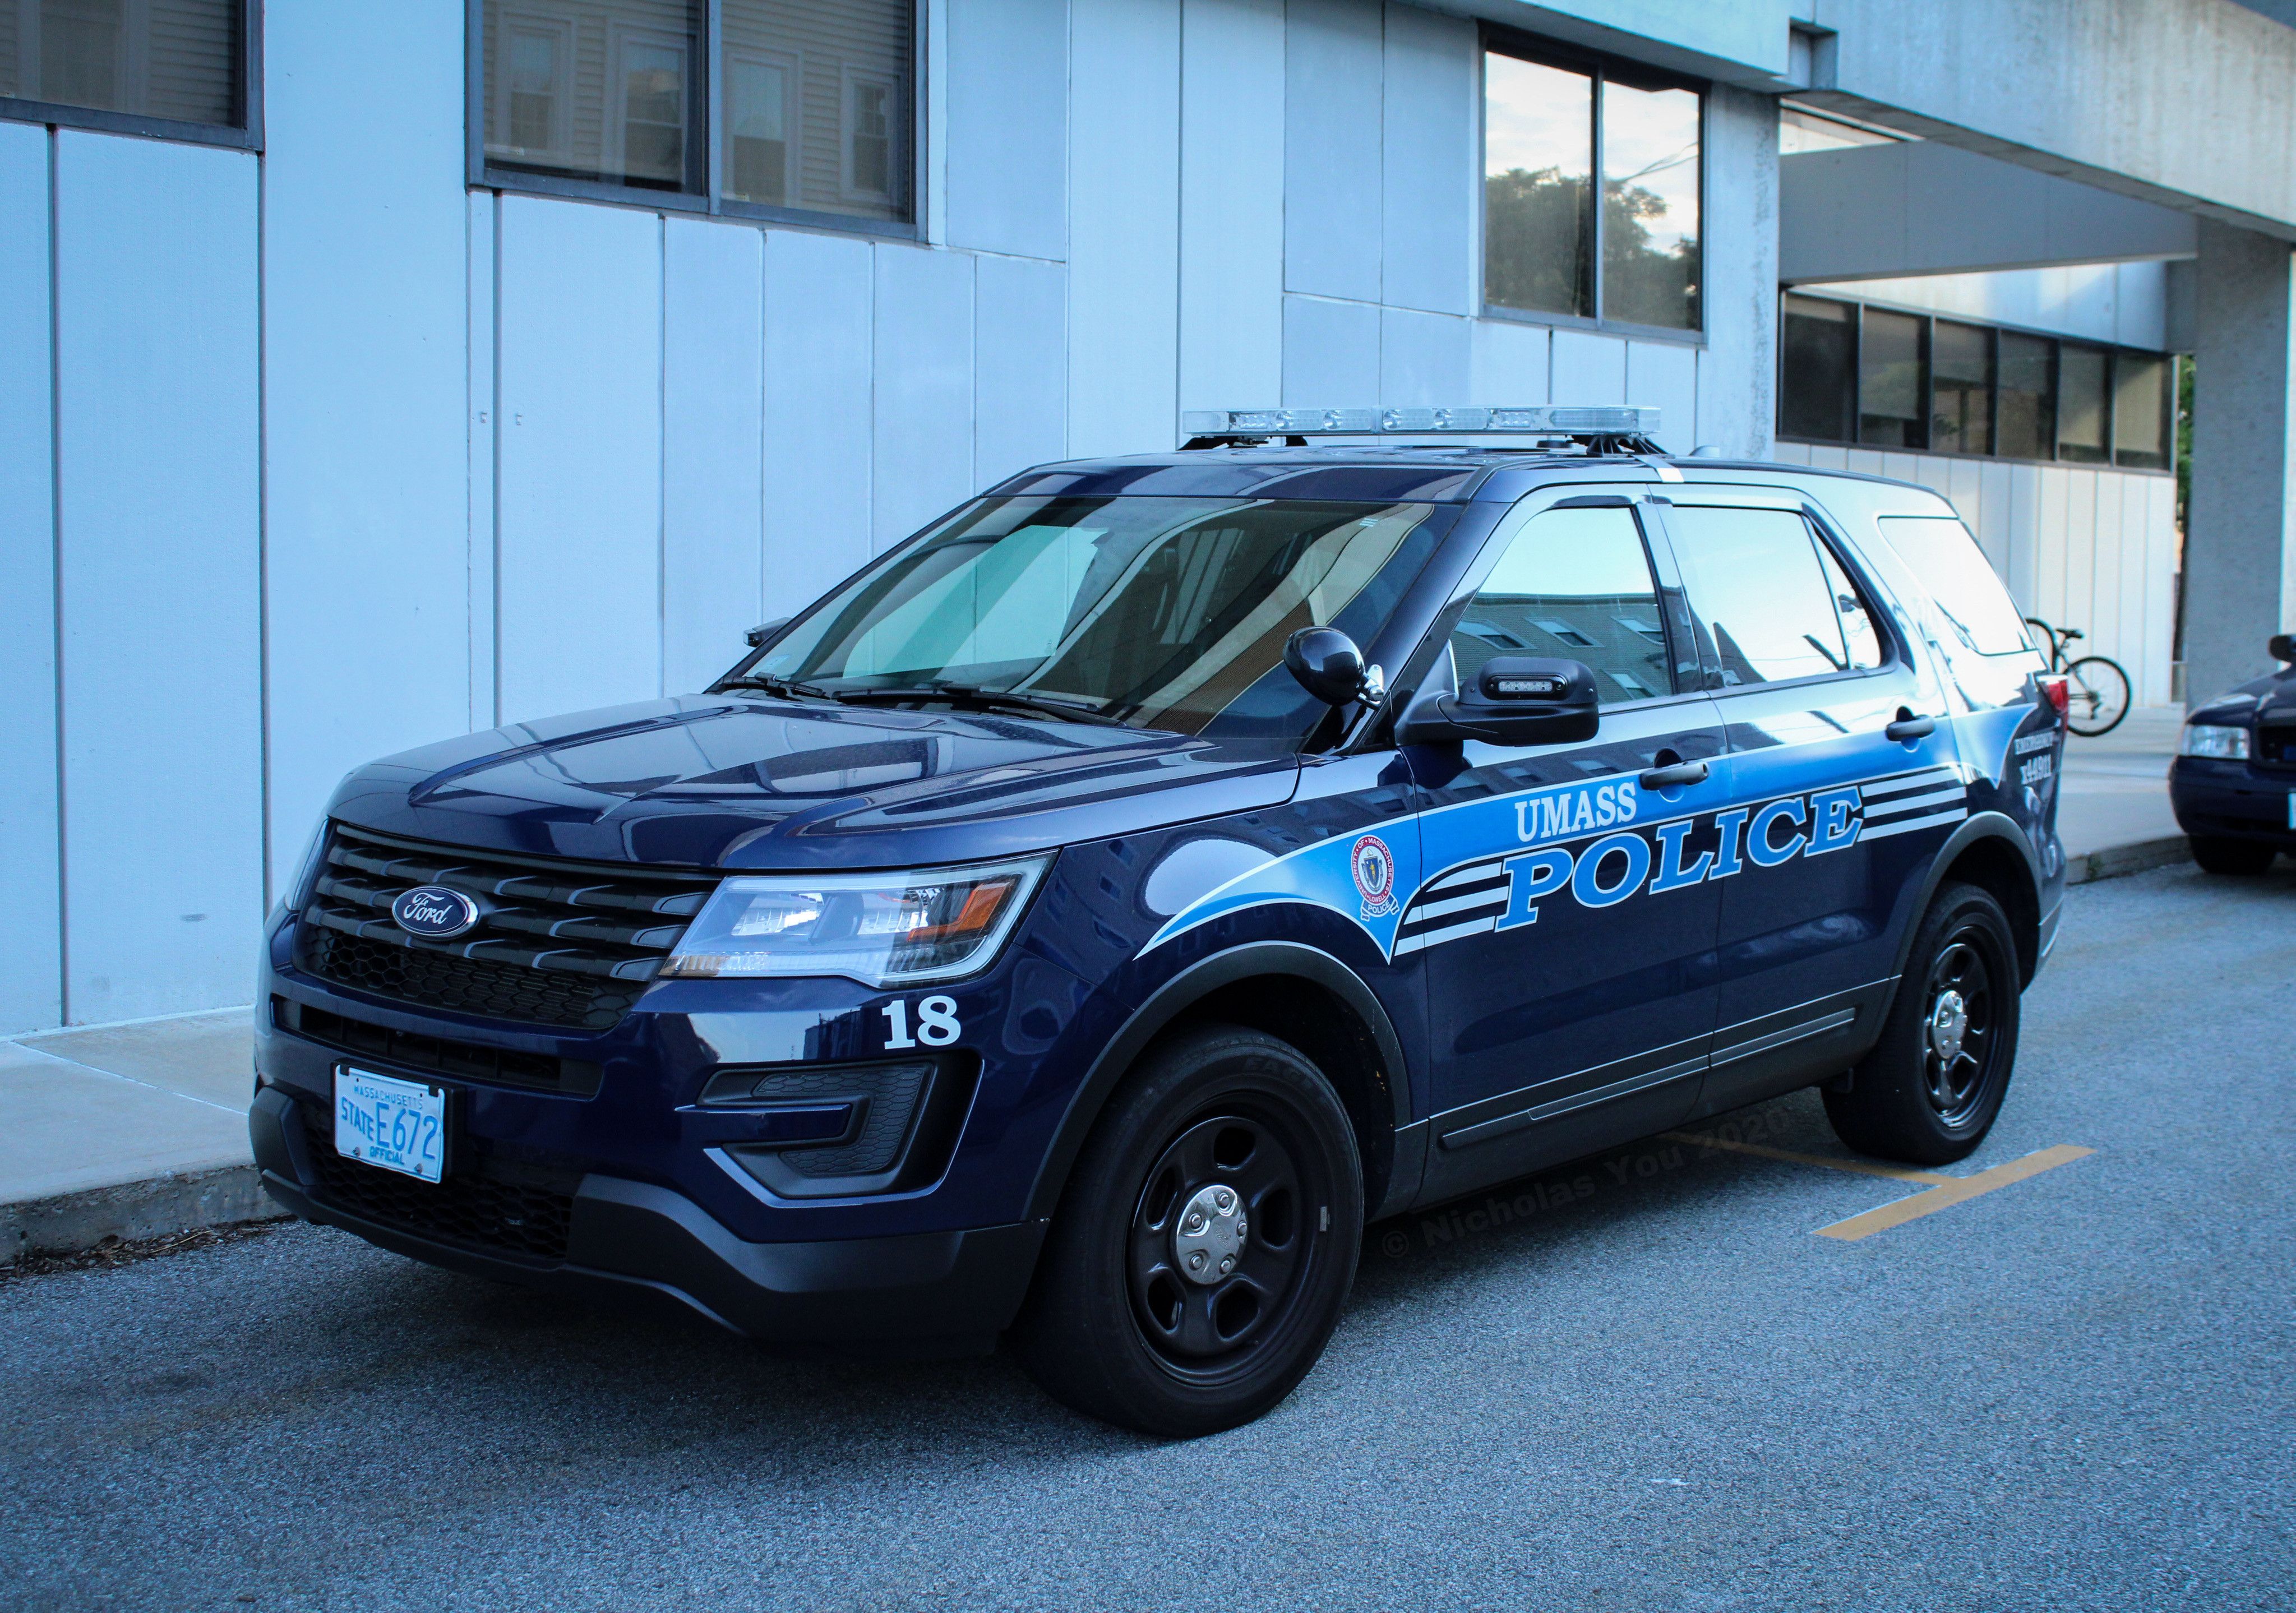 A photo  of University of Massachusetts Lowell Police
            Cruiser 18, a 2016-2019 Ford Police Interceptor Utility             taken by Nicholas You